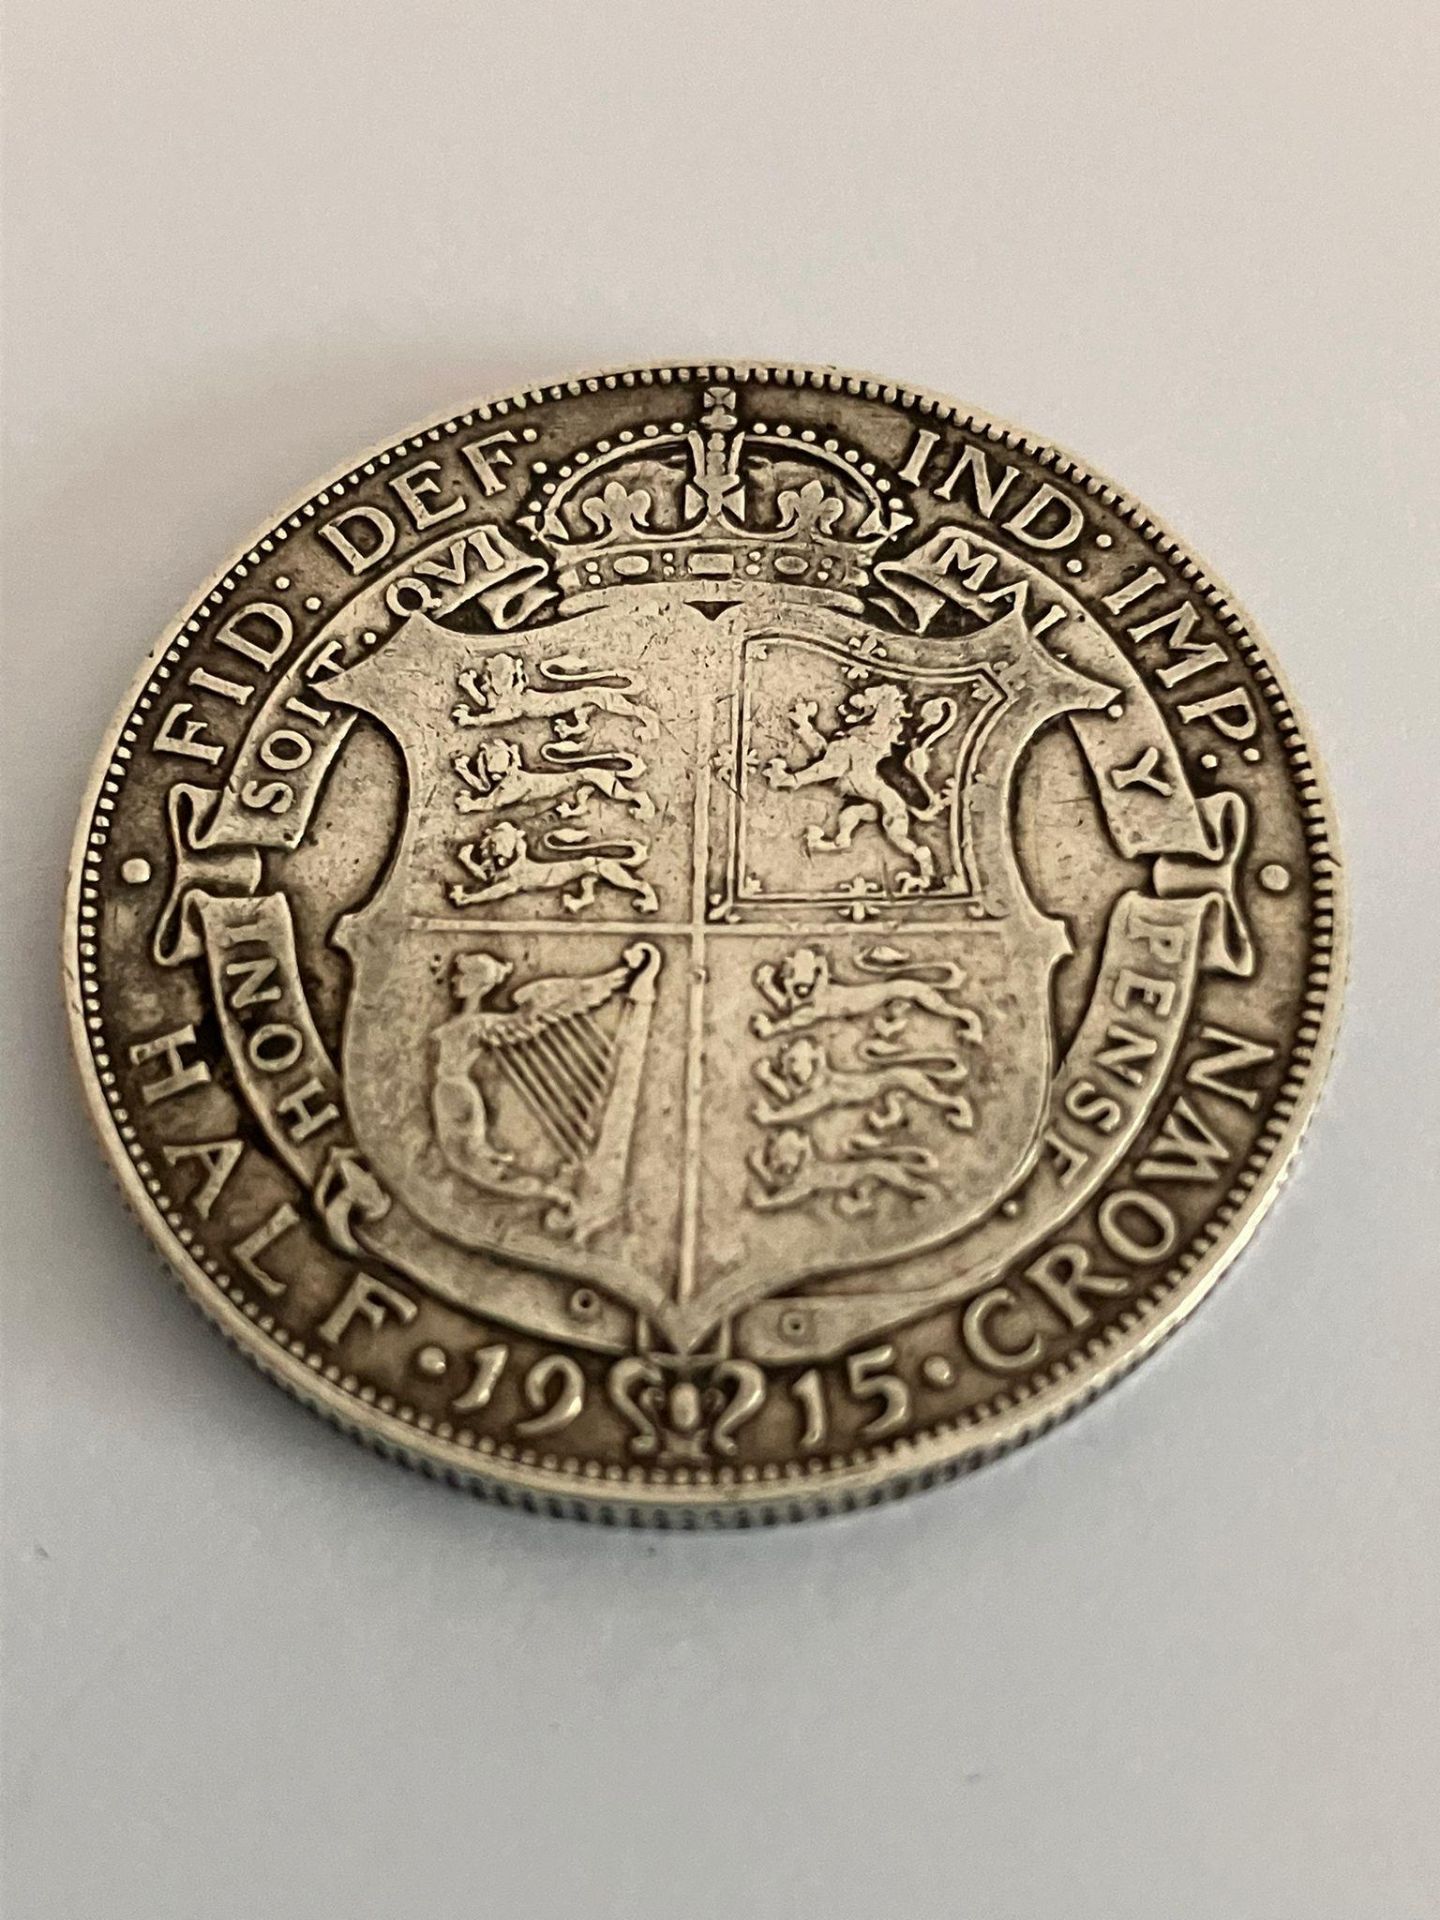 1915 SILVER HALF CROWN. Very fine condition, extra fine condition if Kings blemishes cleared.